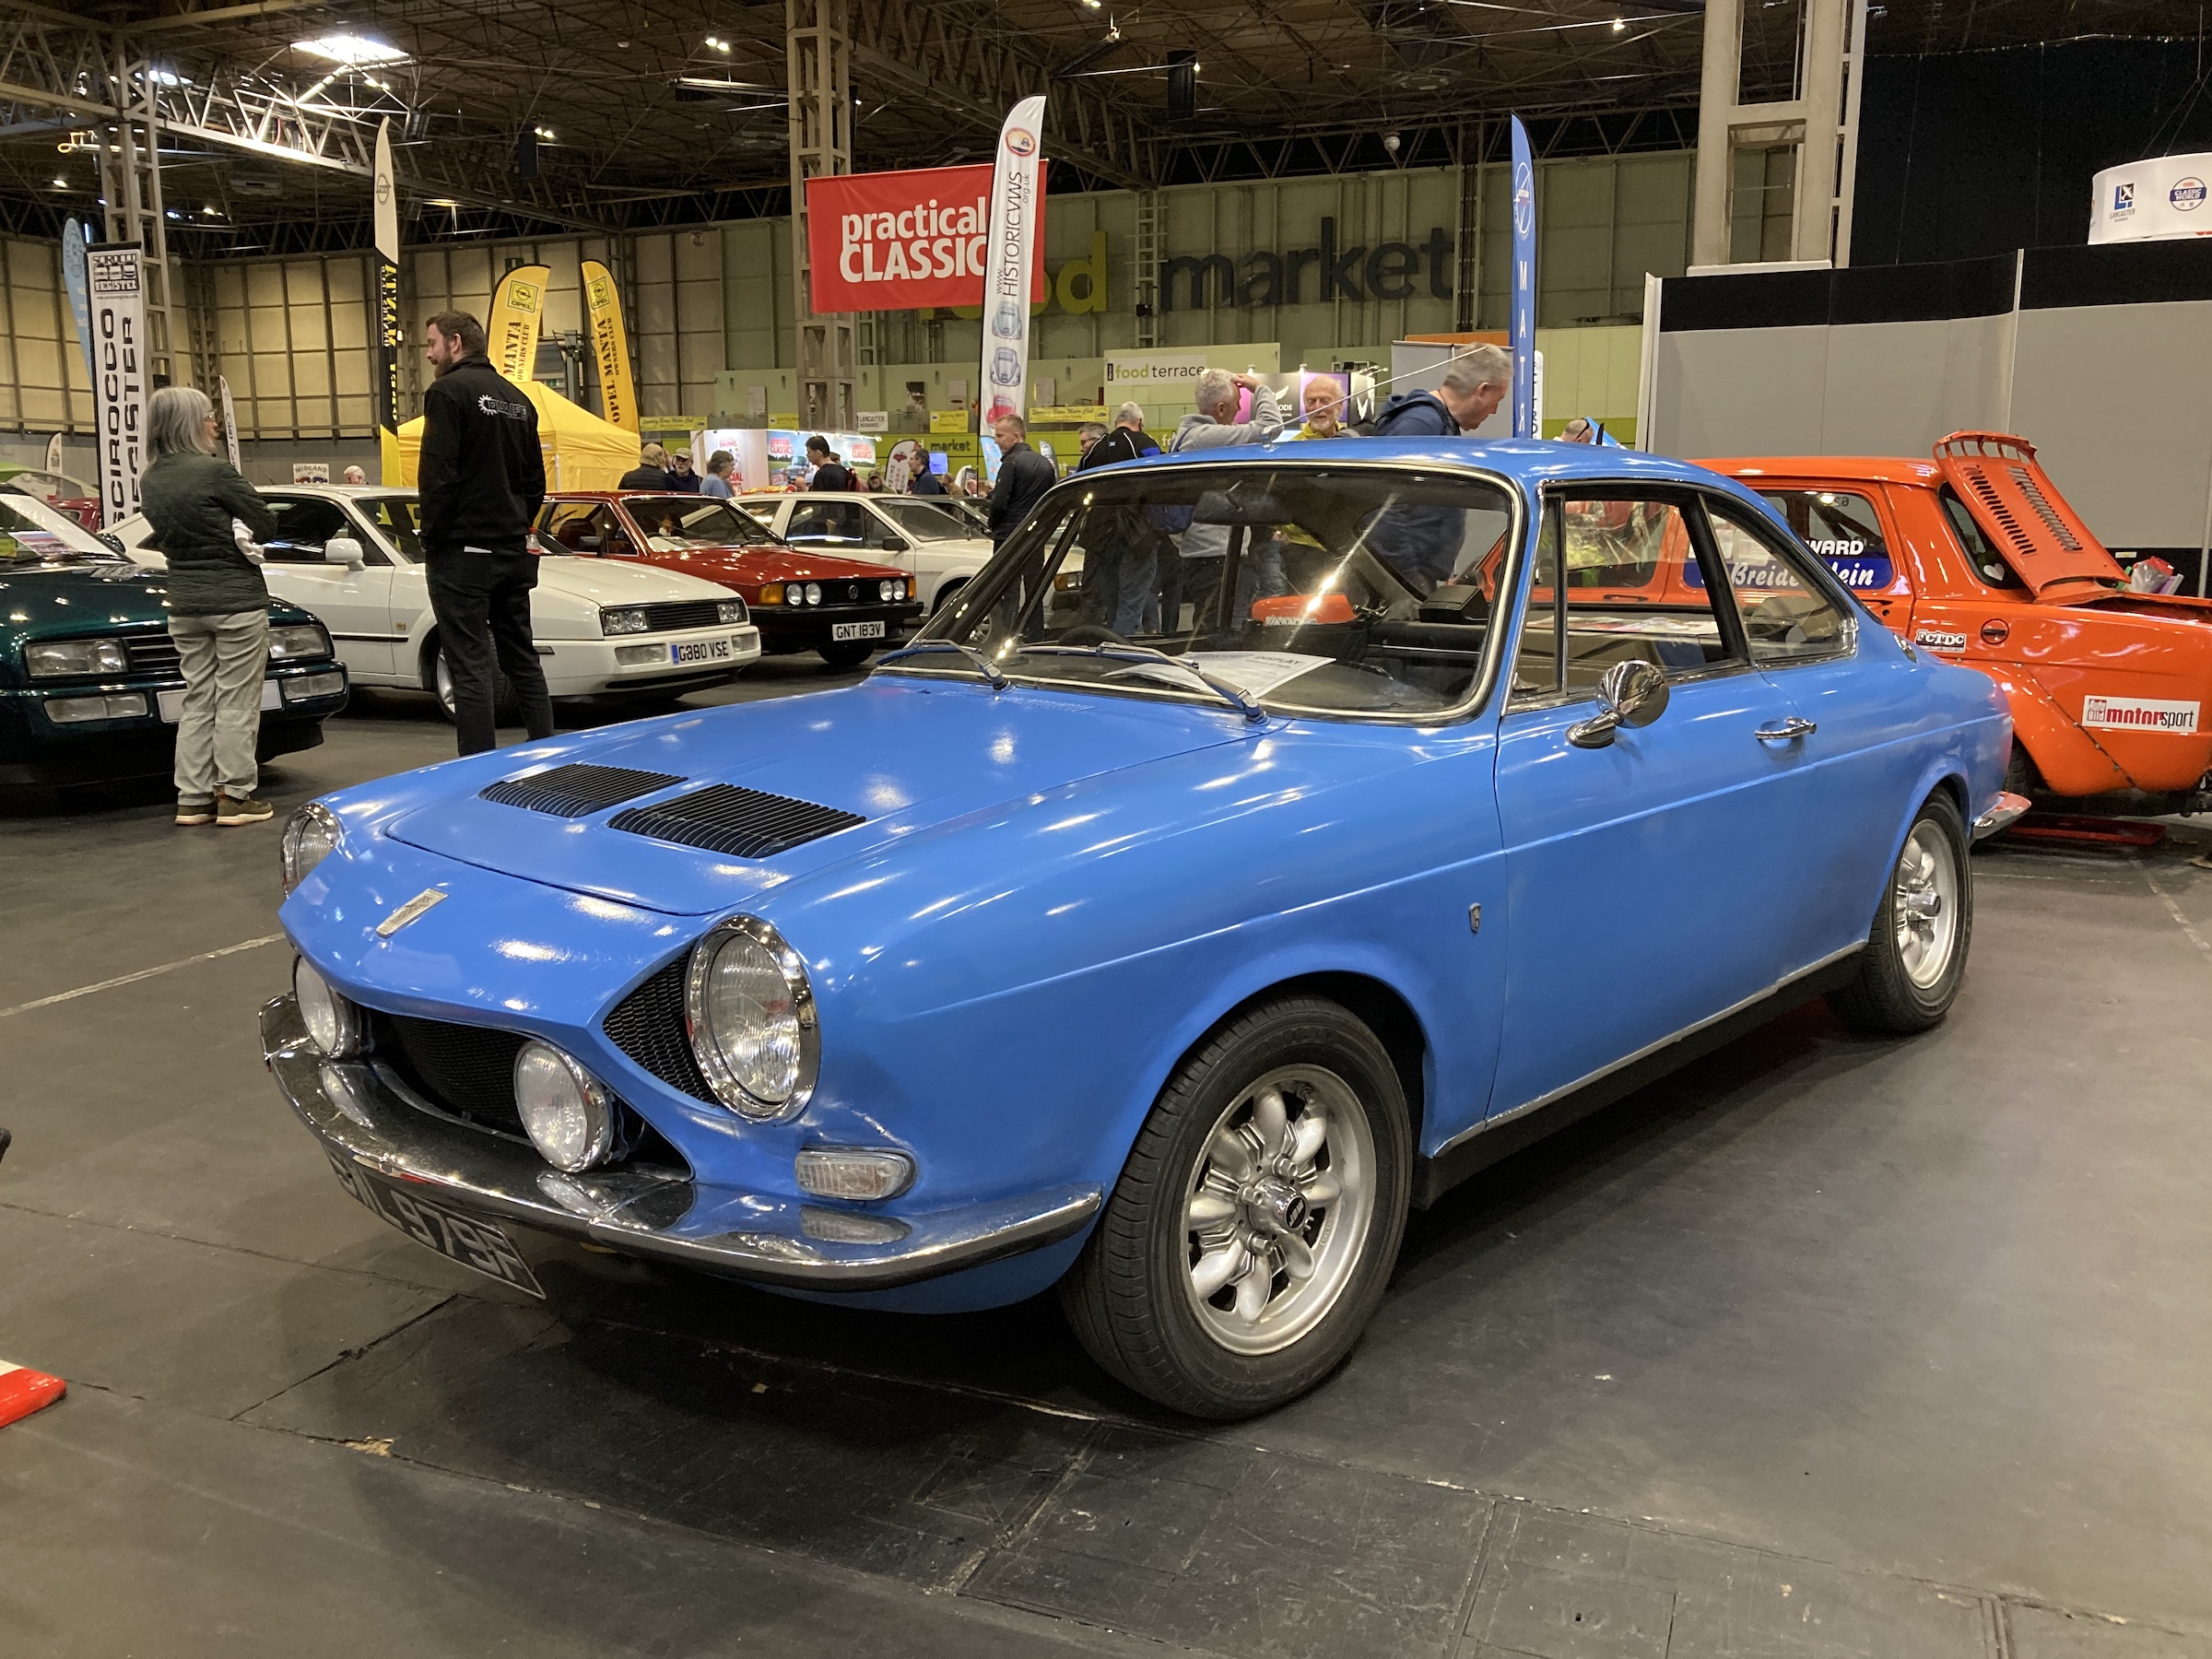 Gallery: NEC Classic Car and Restoration Show